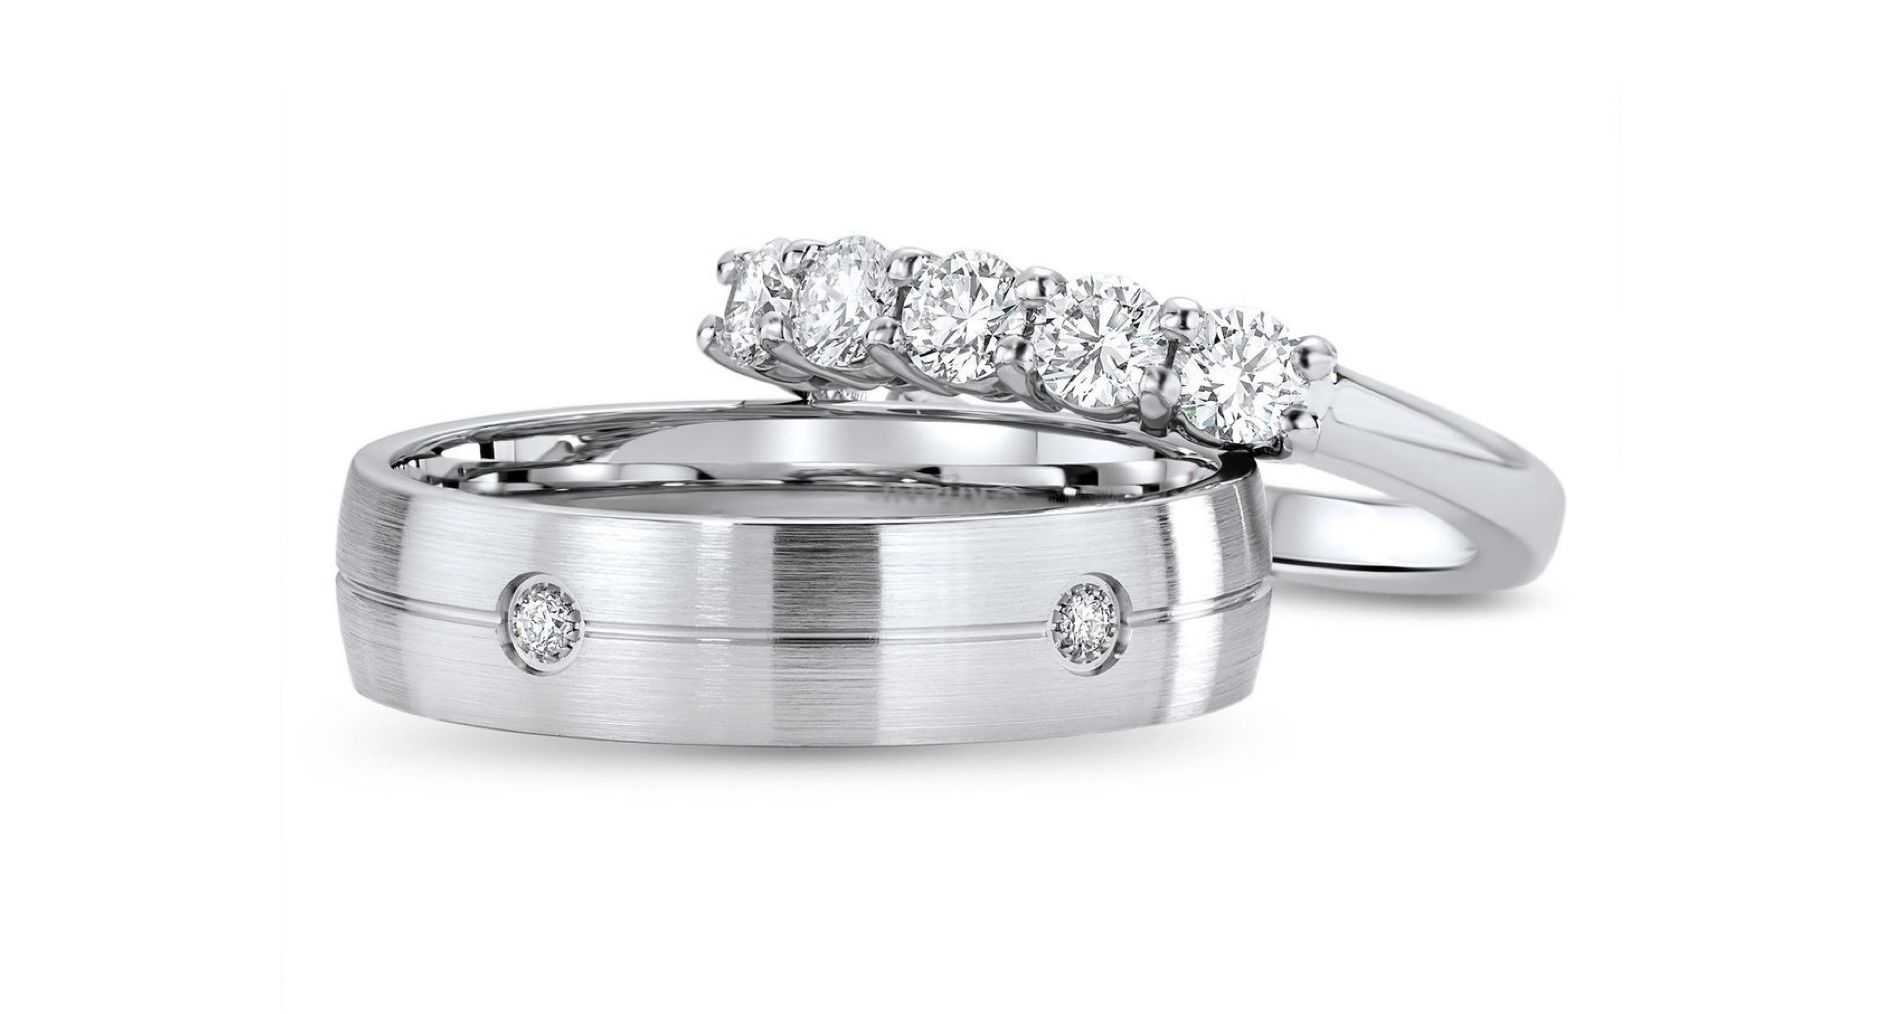 an image of a mens diamond wedding band and women's five stone diamond ring.